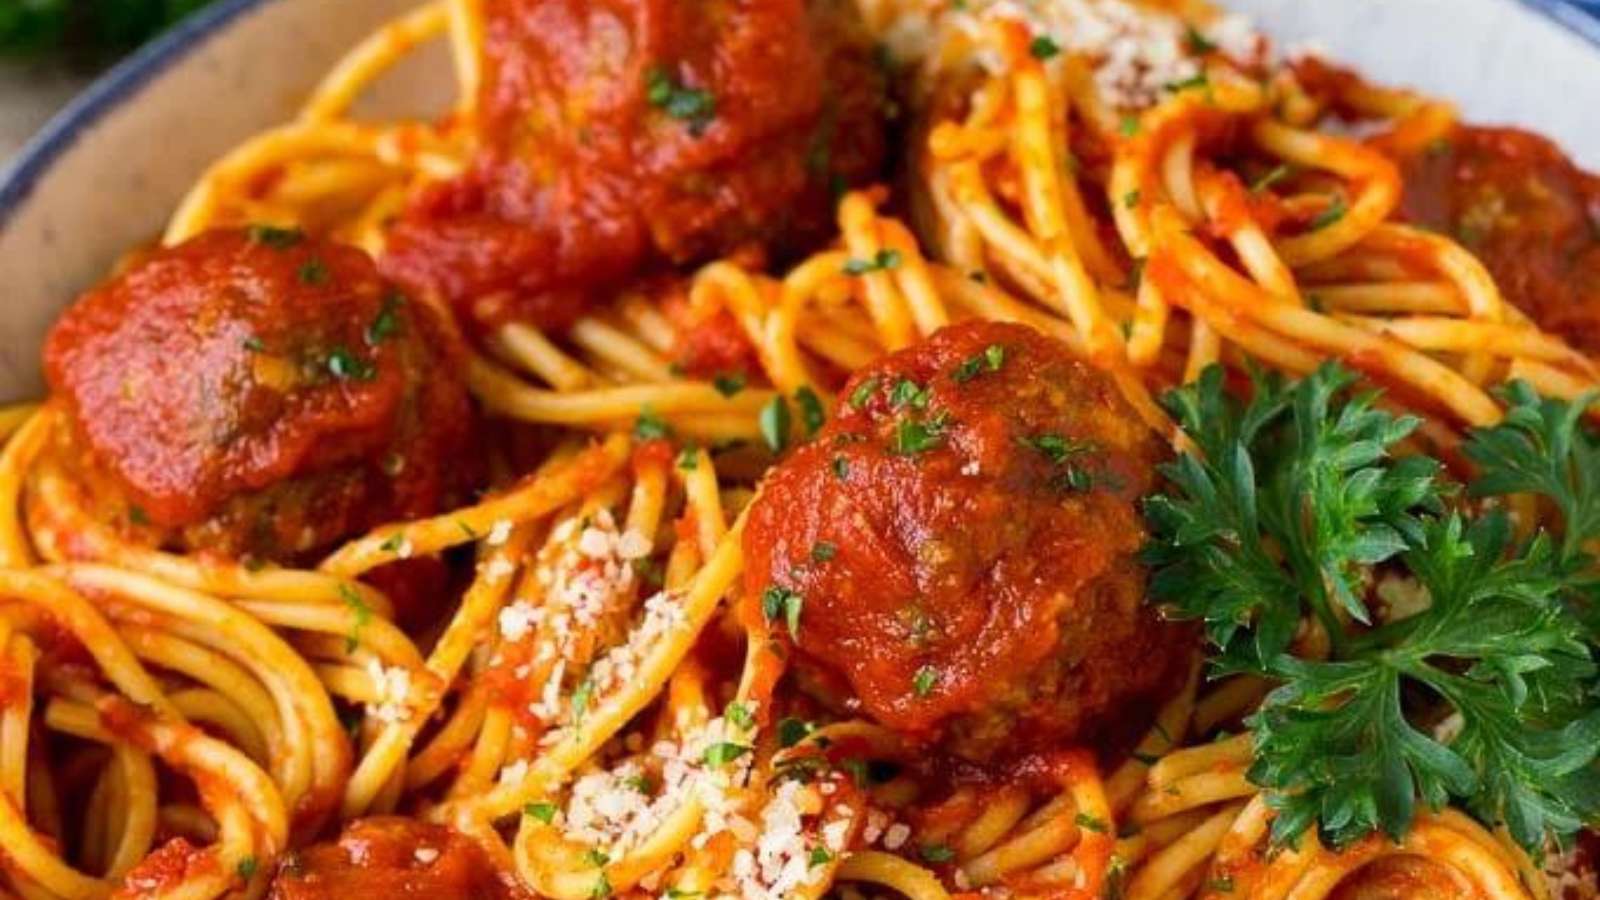 Spaghetti with meatballs and parsley in a blue bowl.